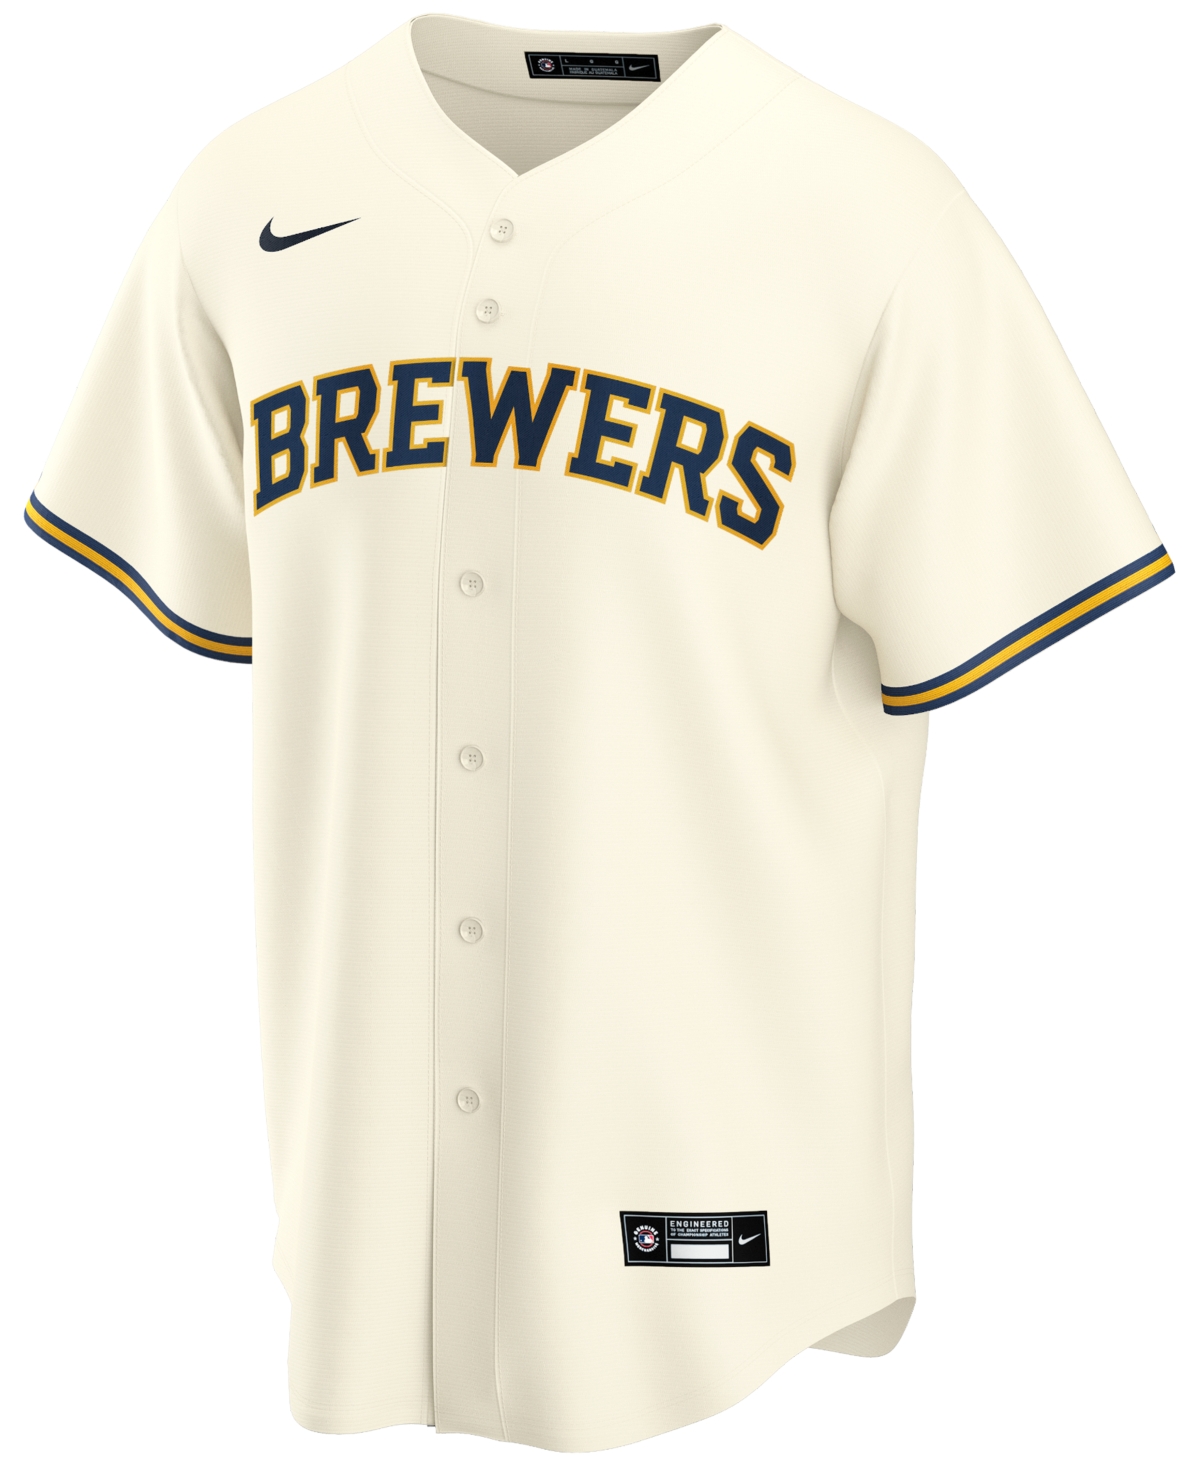 Nike Men's Milwaukee Brewers Official Blank Replica Jersey